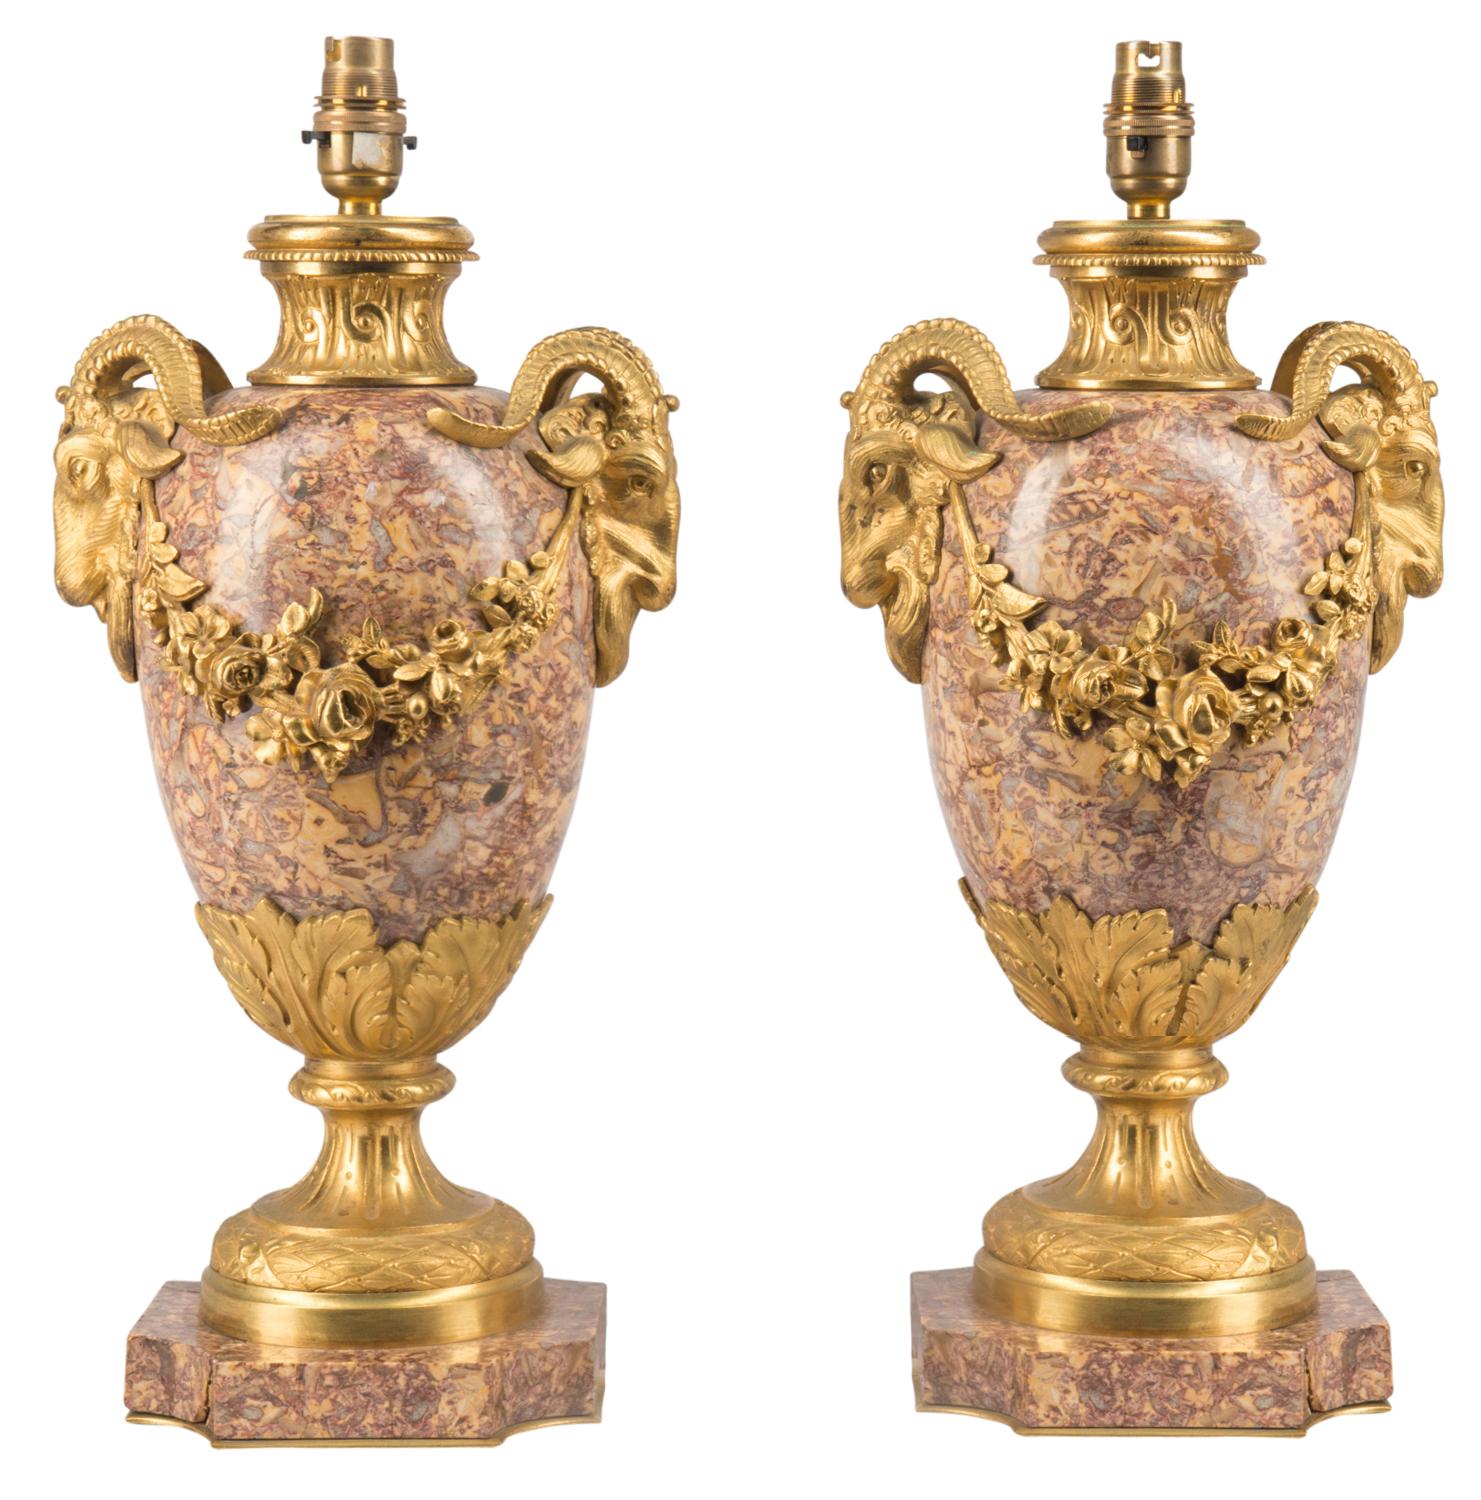 A good quality pair of French 19th century gilded ormolu and marble urns, each with classical ram's head mounts and swags.